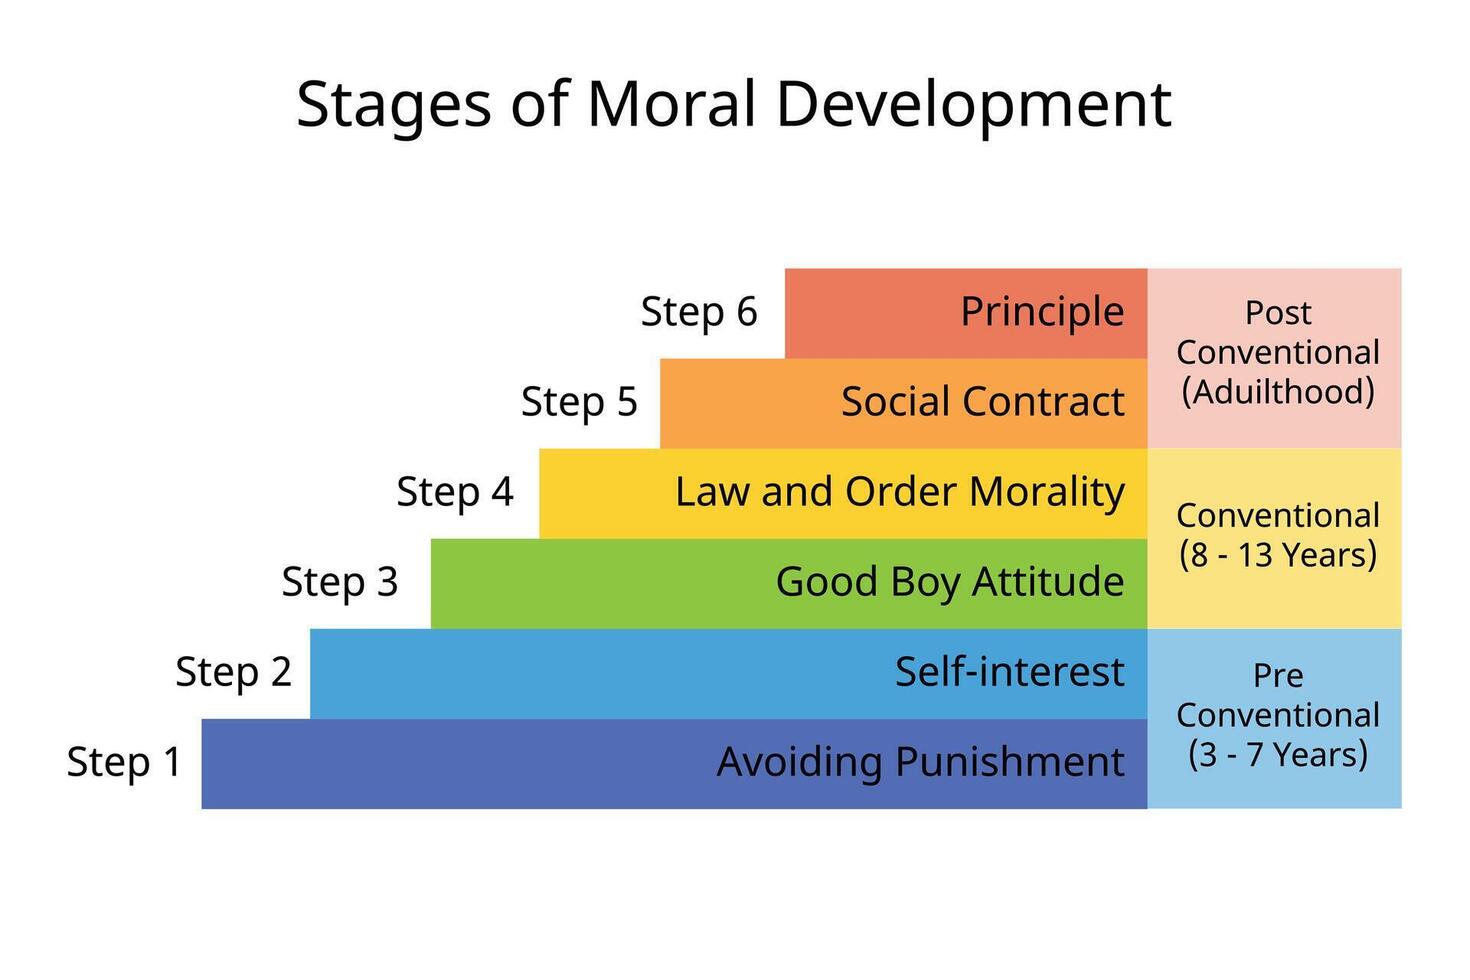 6 stages of moral development of principle, social contact, self interested, avoid punishment,  good boy attitude, law and order morality vector